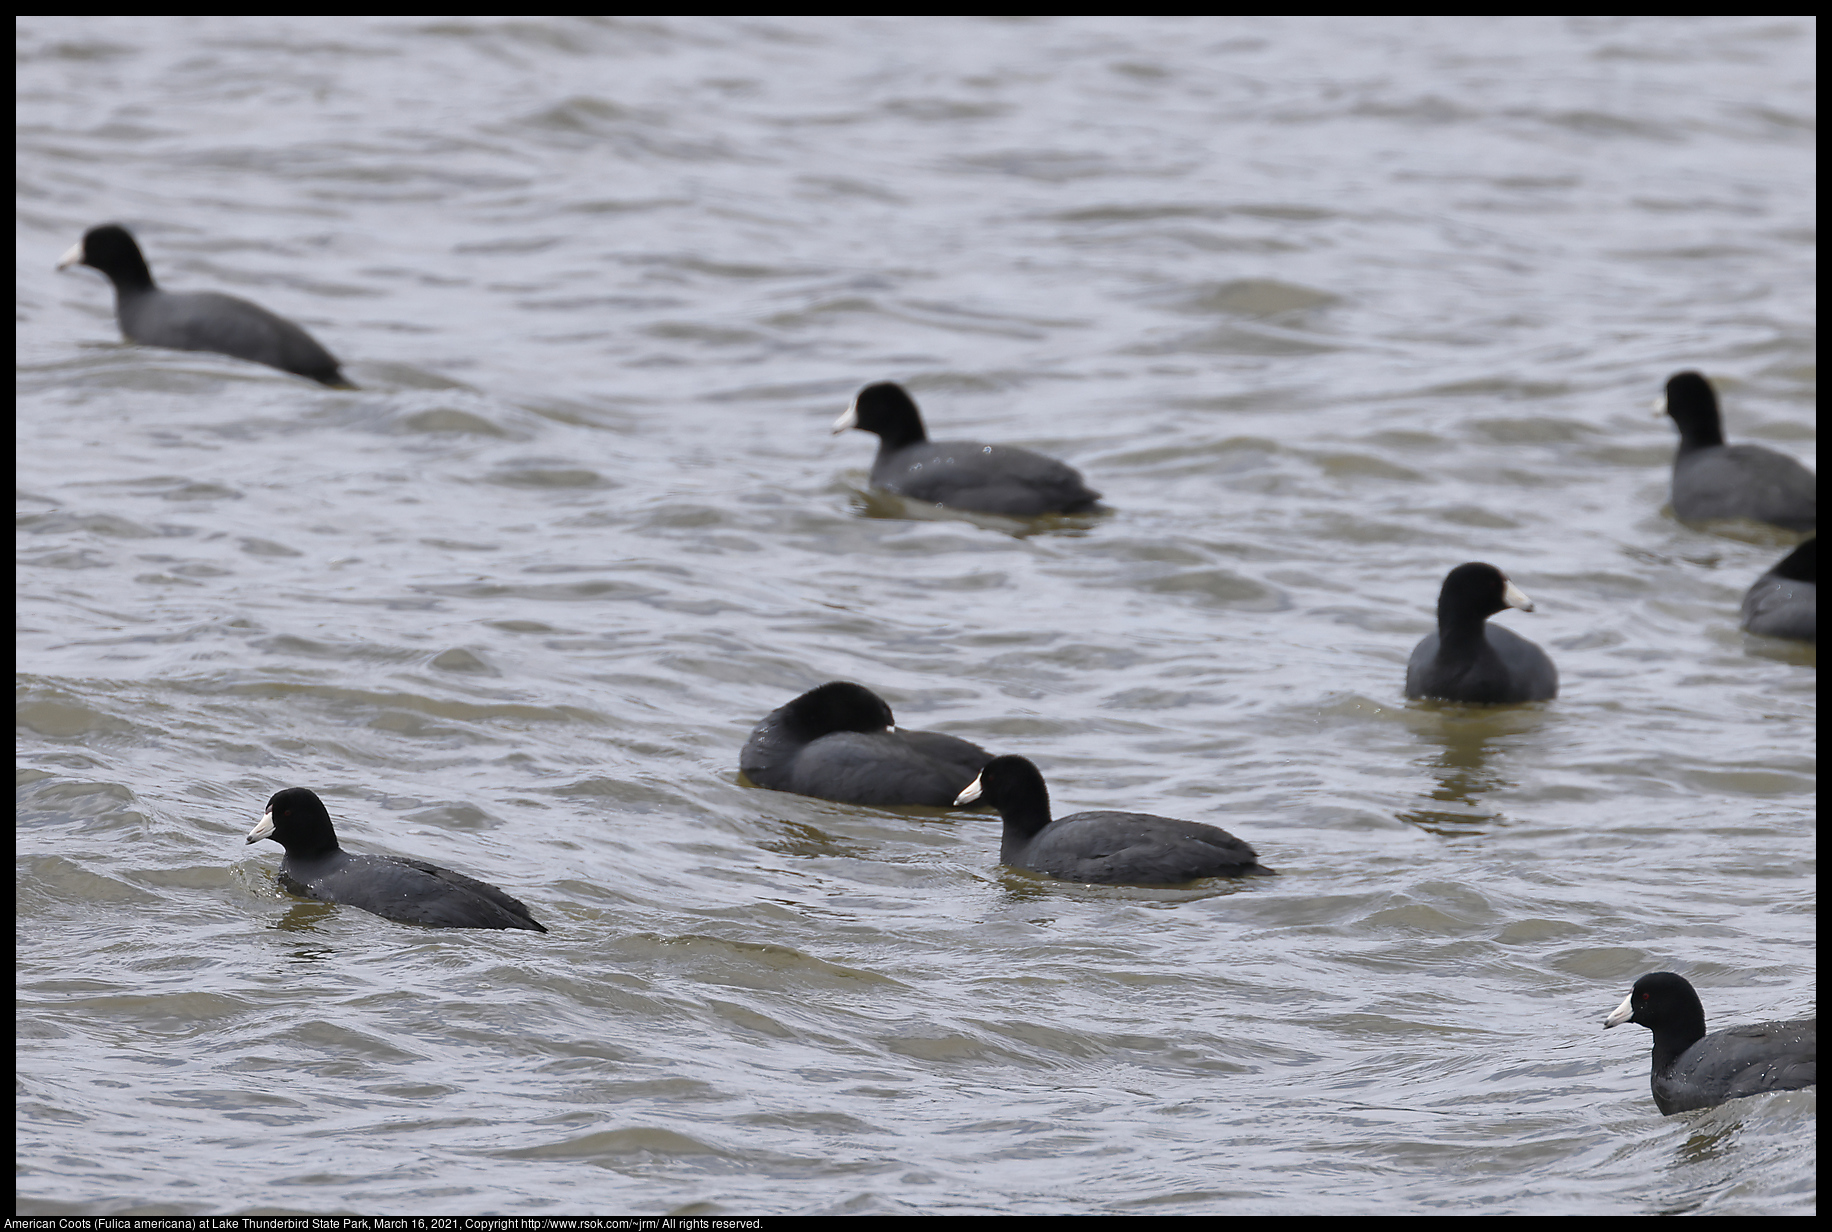 American Coots (Fulica americana) at Lake Thunderbird State Park, March 16, 2021